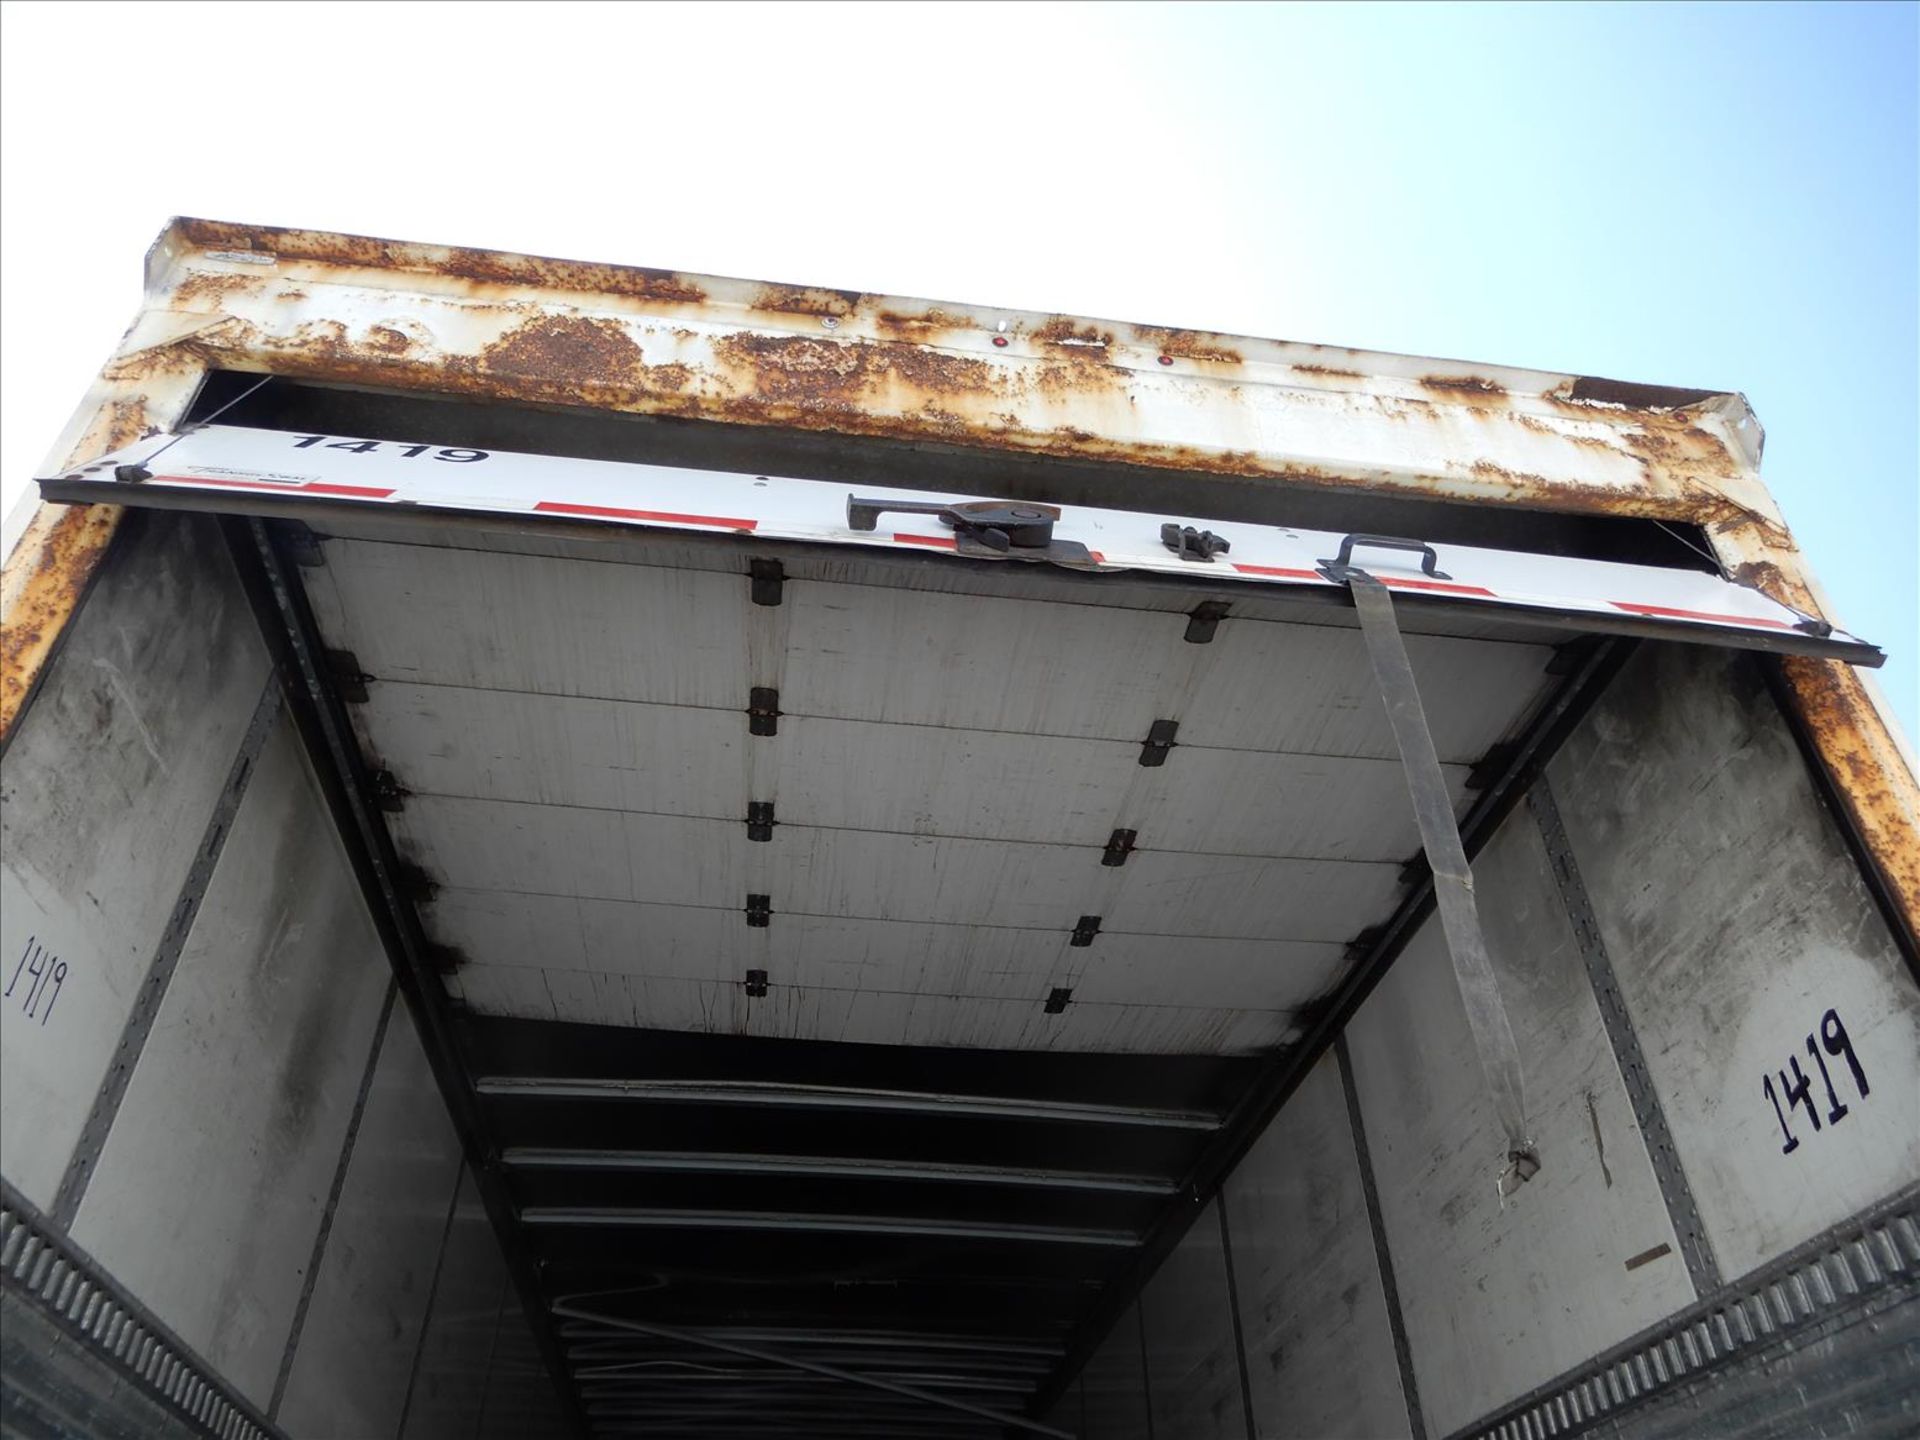 2012 Stoughton Trailer - Located in Indianapolis, IN - Image 17 of 27